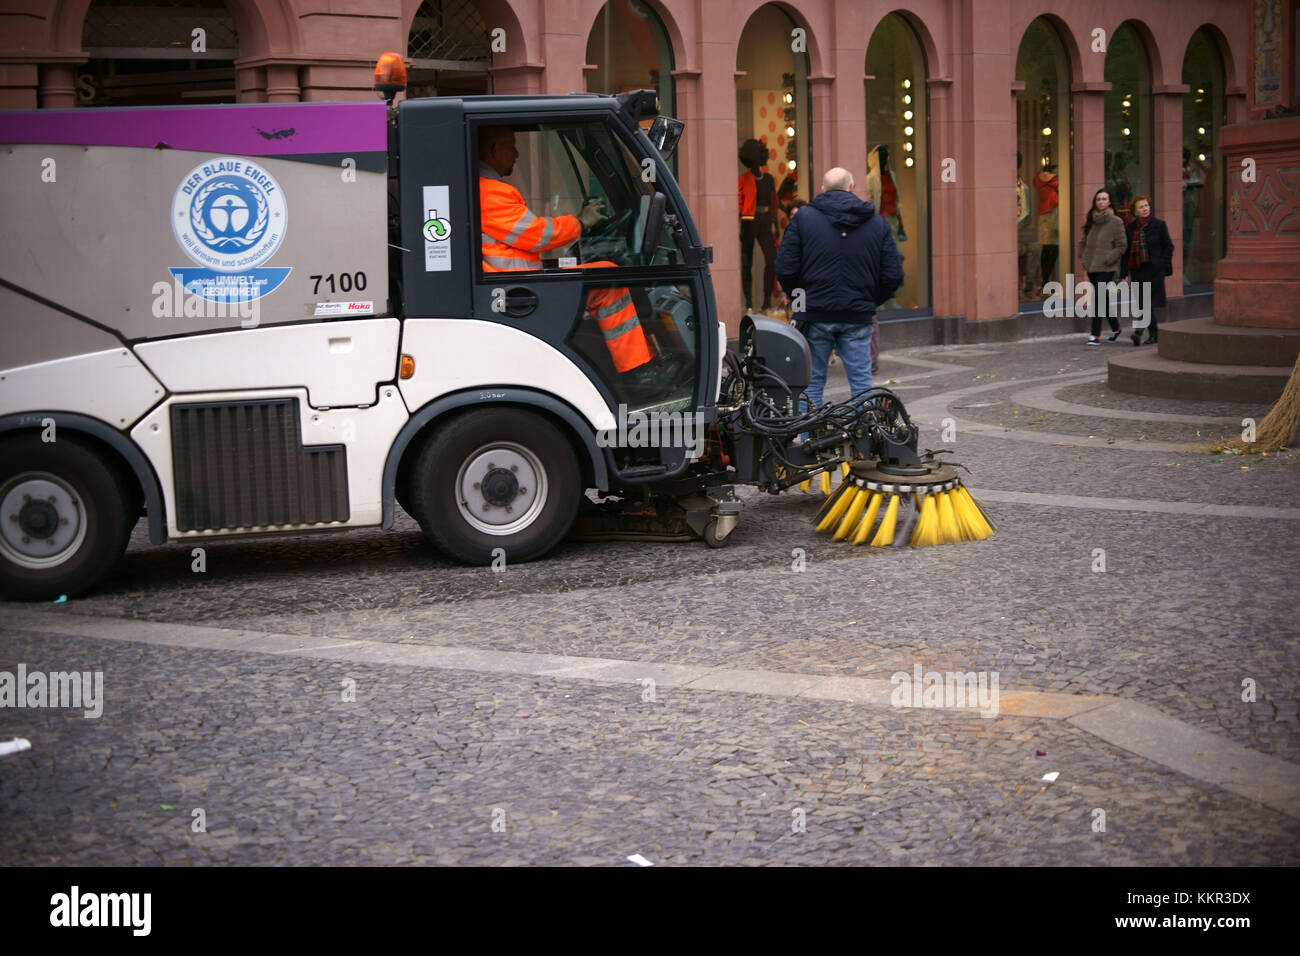 An environmentally friendly street cleaning vehicle cleaning the ground of the marketplace after the weekly market in Mainz. Stock Photo